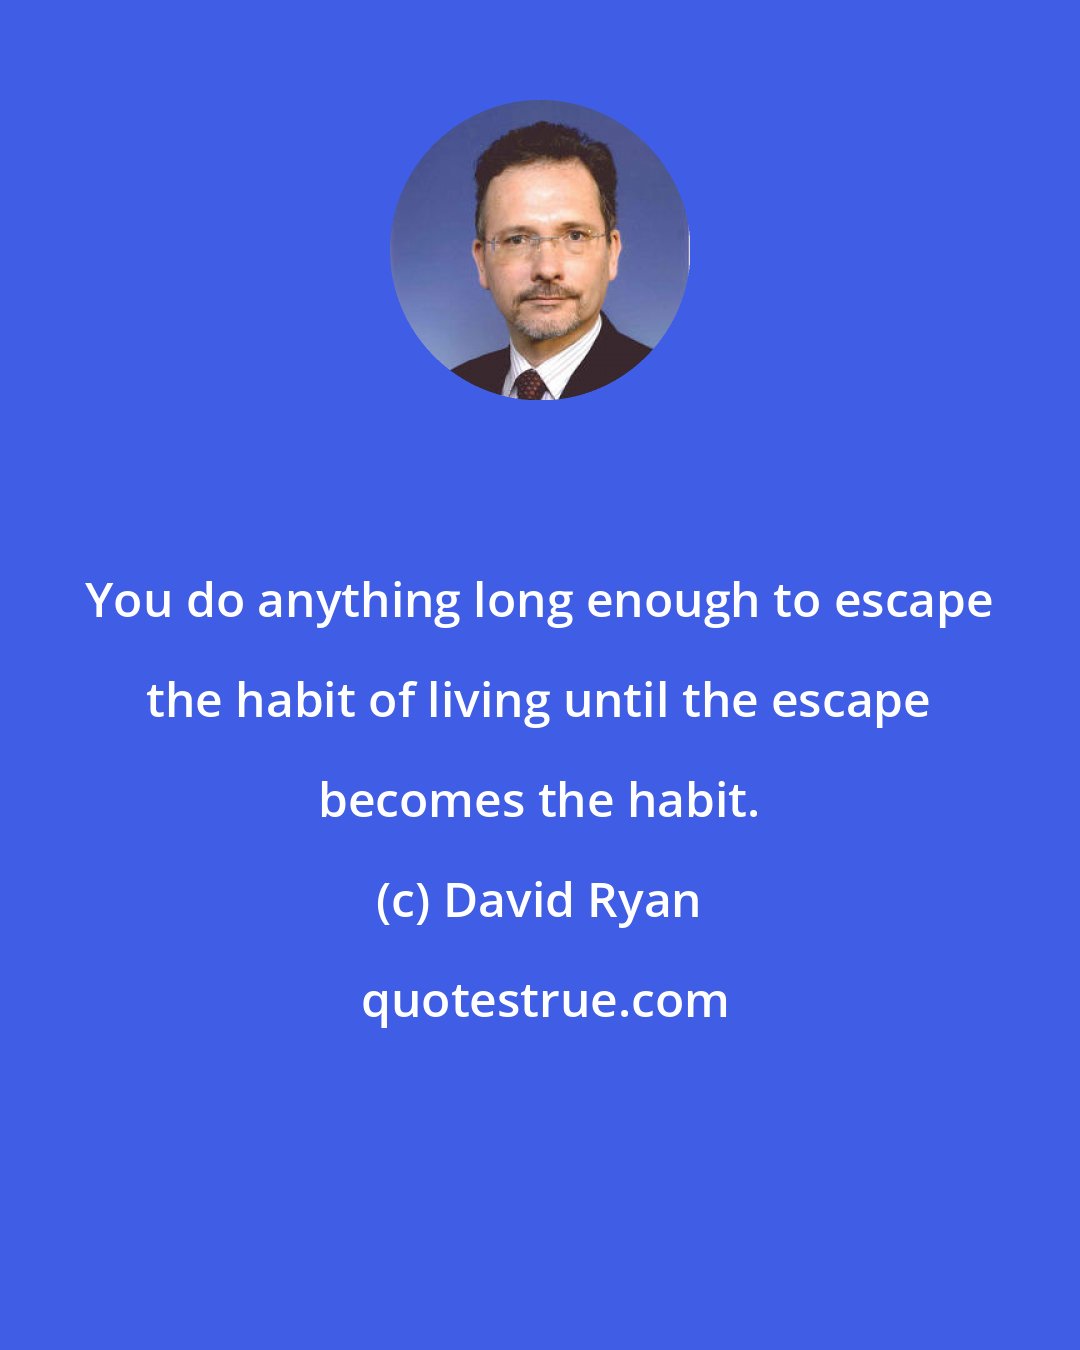 David Ryan: You do anything long enough to escape the habit of living until the escape becomes the habit.